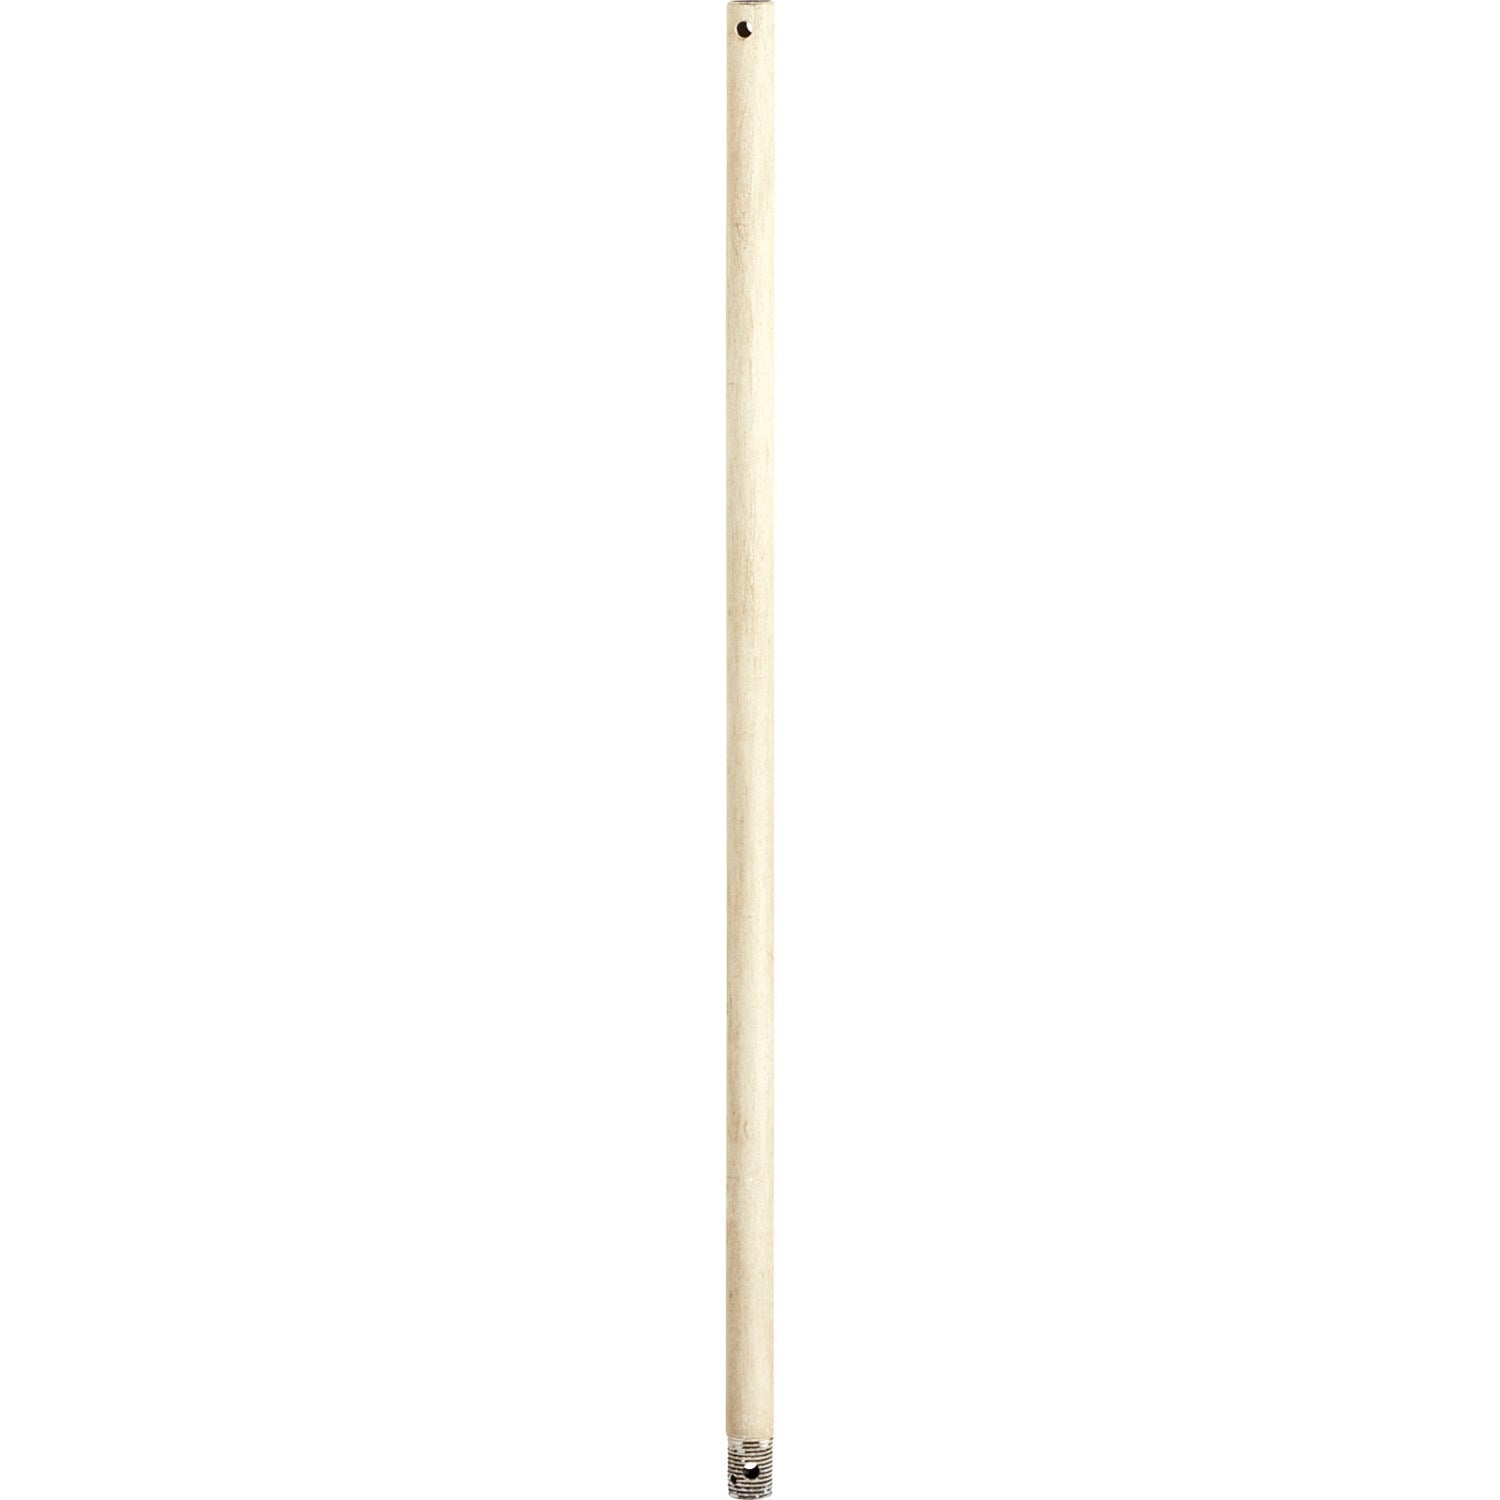 Quorum - 6-2470 - 24" Universal Downrod - 24 in. Downrods - Persian White